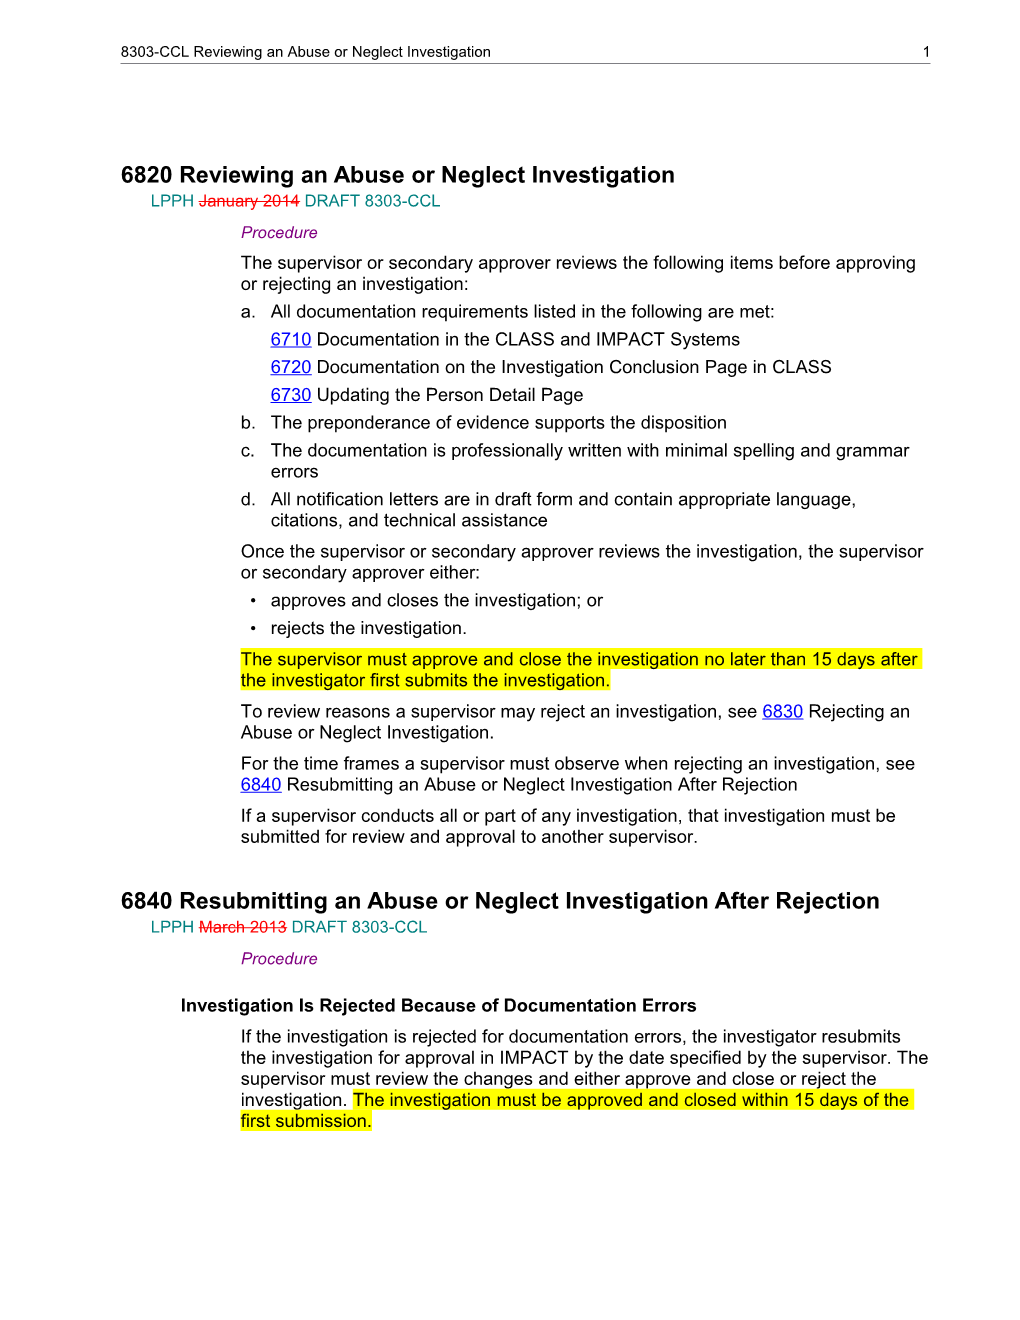 6820 Reviewing an Abuse Or Neglect Investigation